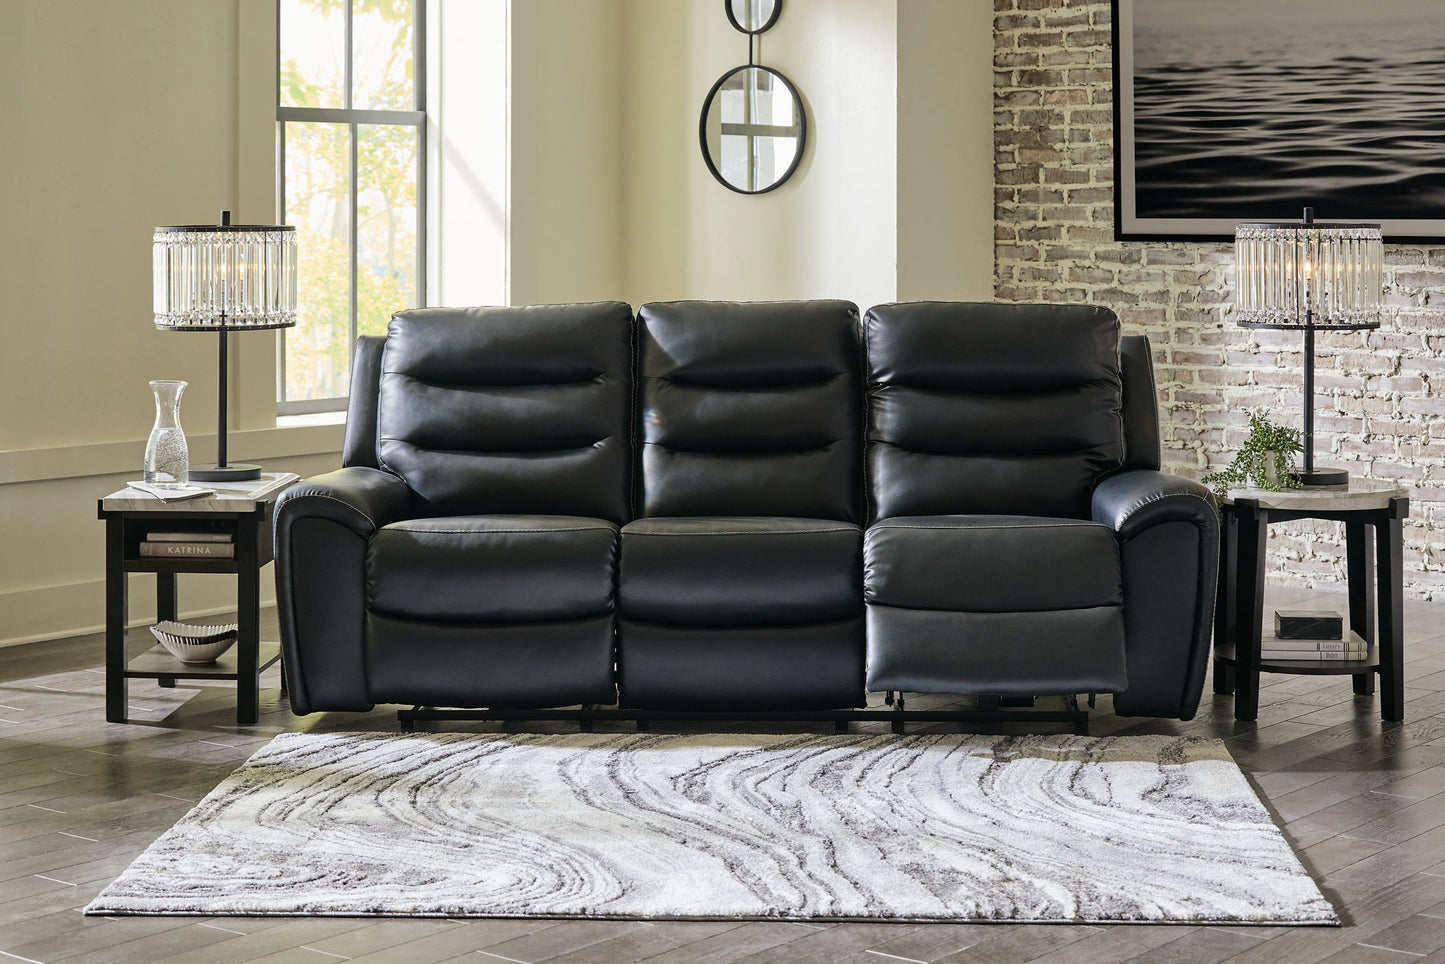 Warlin Sofa, Loveseat and Recliner at Walker Mattress and Furniture Locations in Cedar Park and Belton TX.